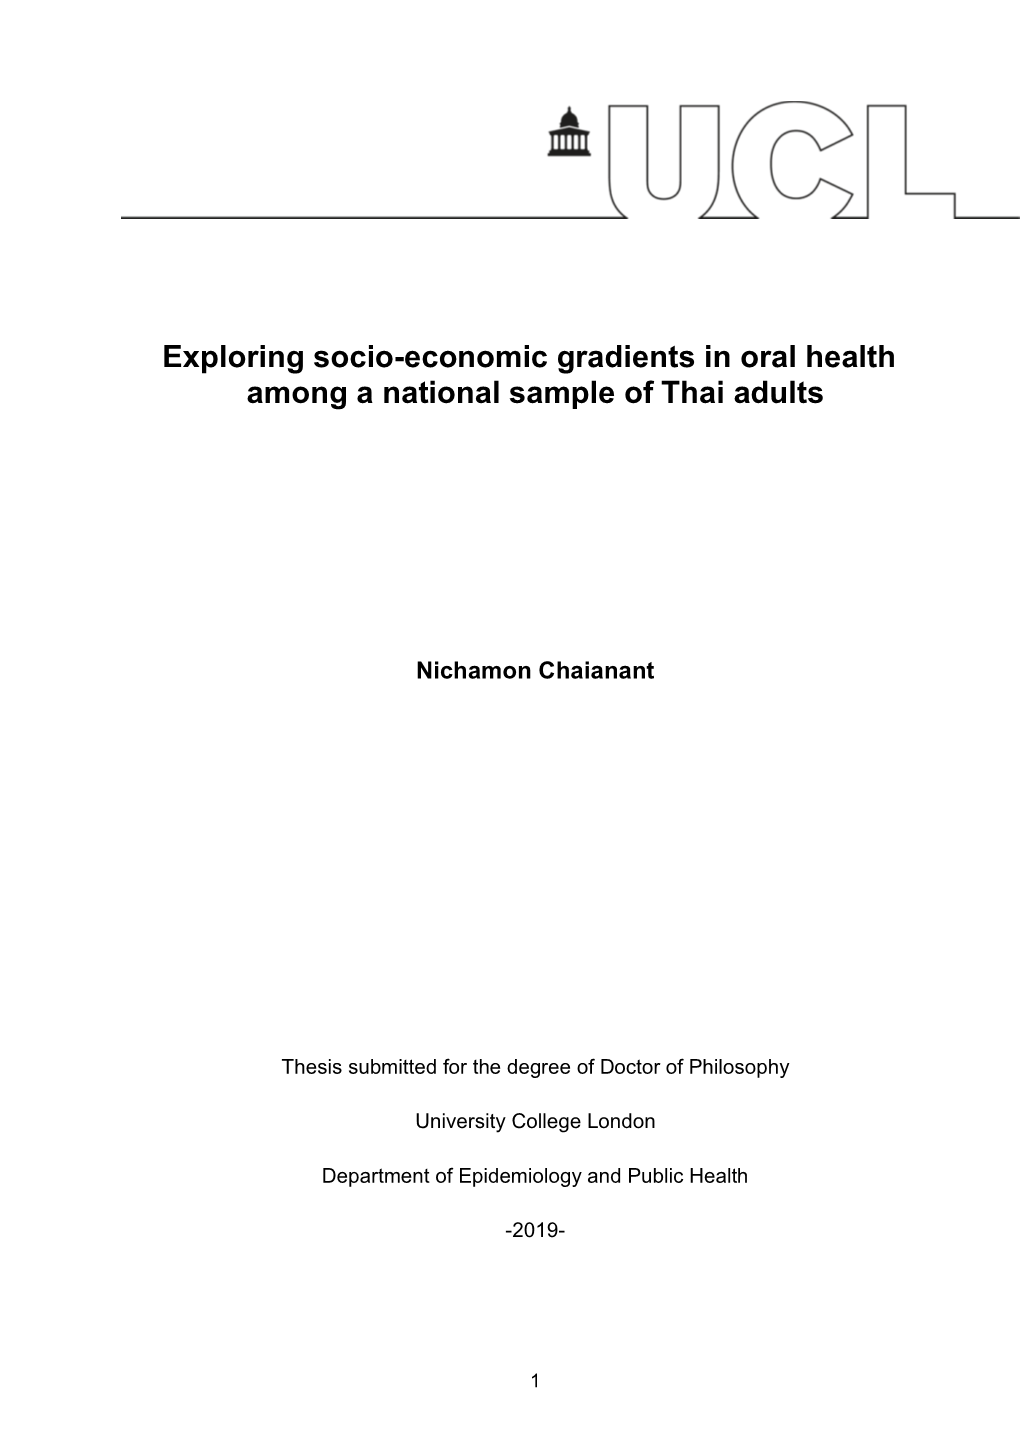 Exploring Socio-Economic Gradients in Oral Health Among a National Sample of Thai Adults